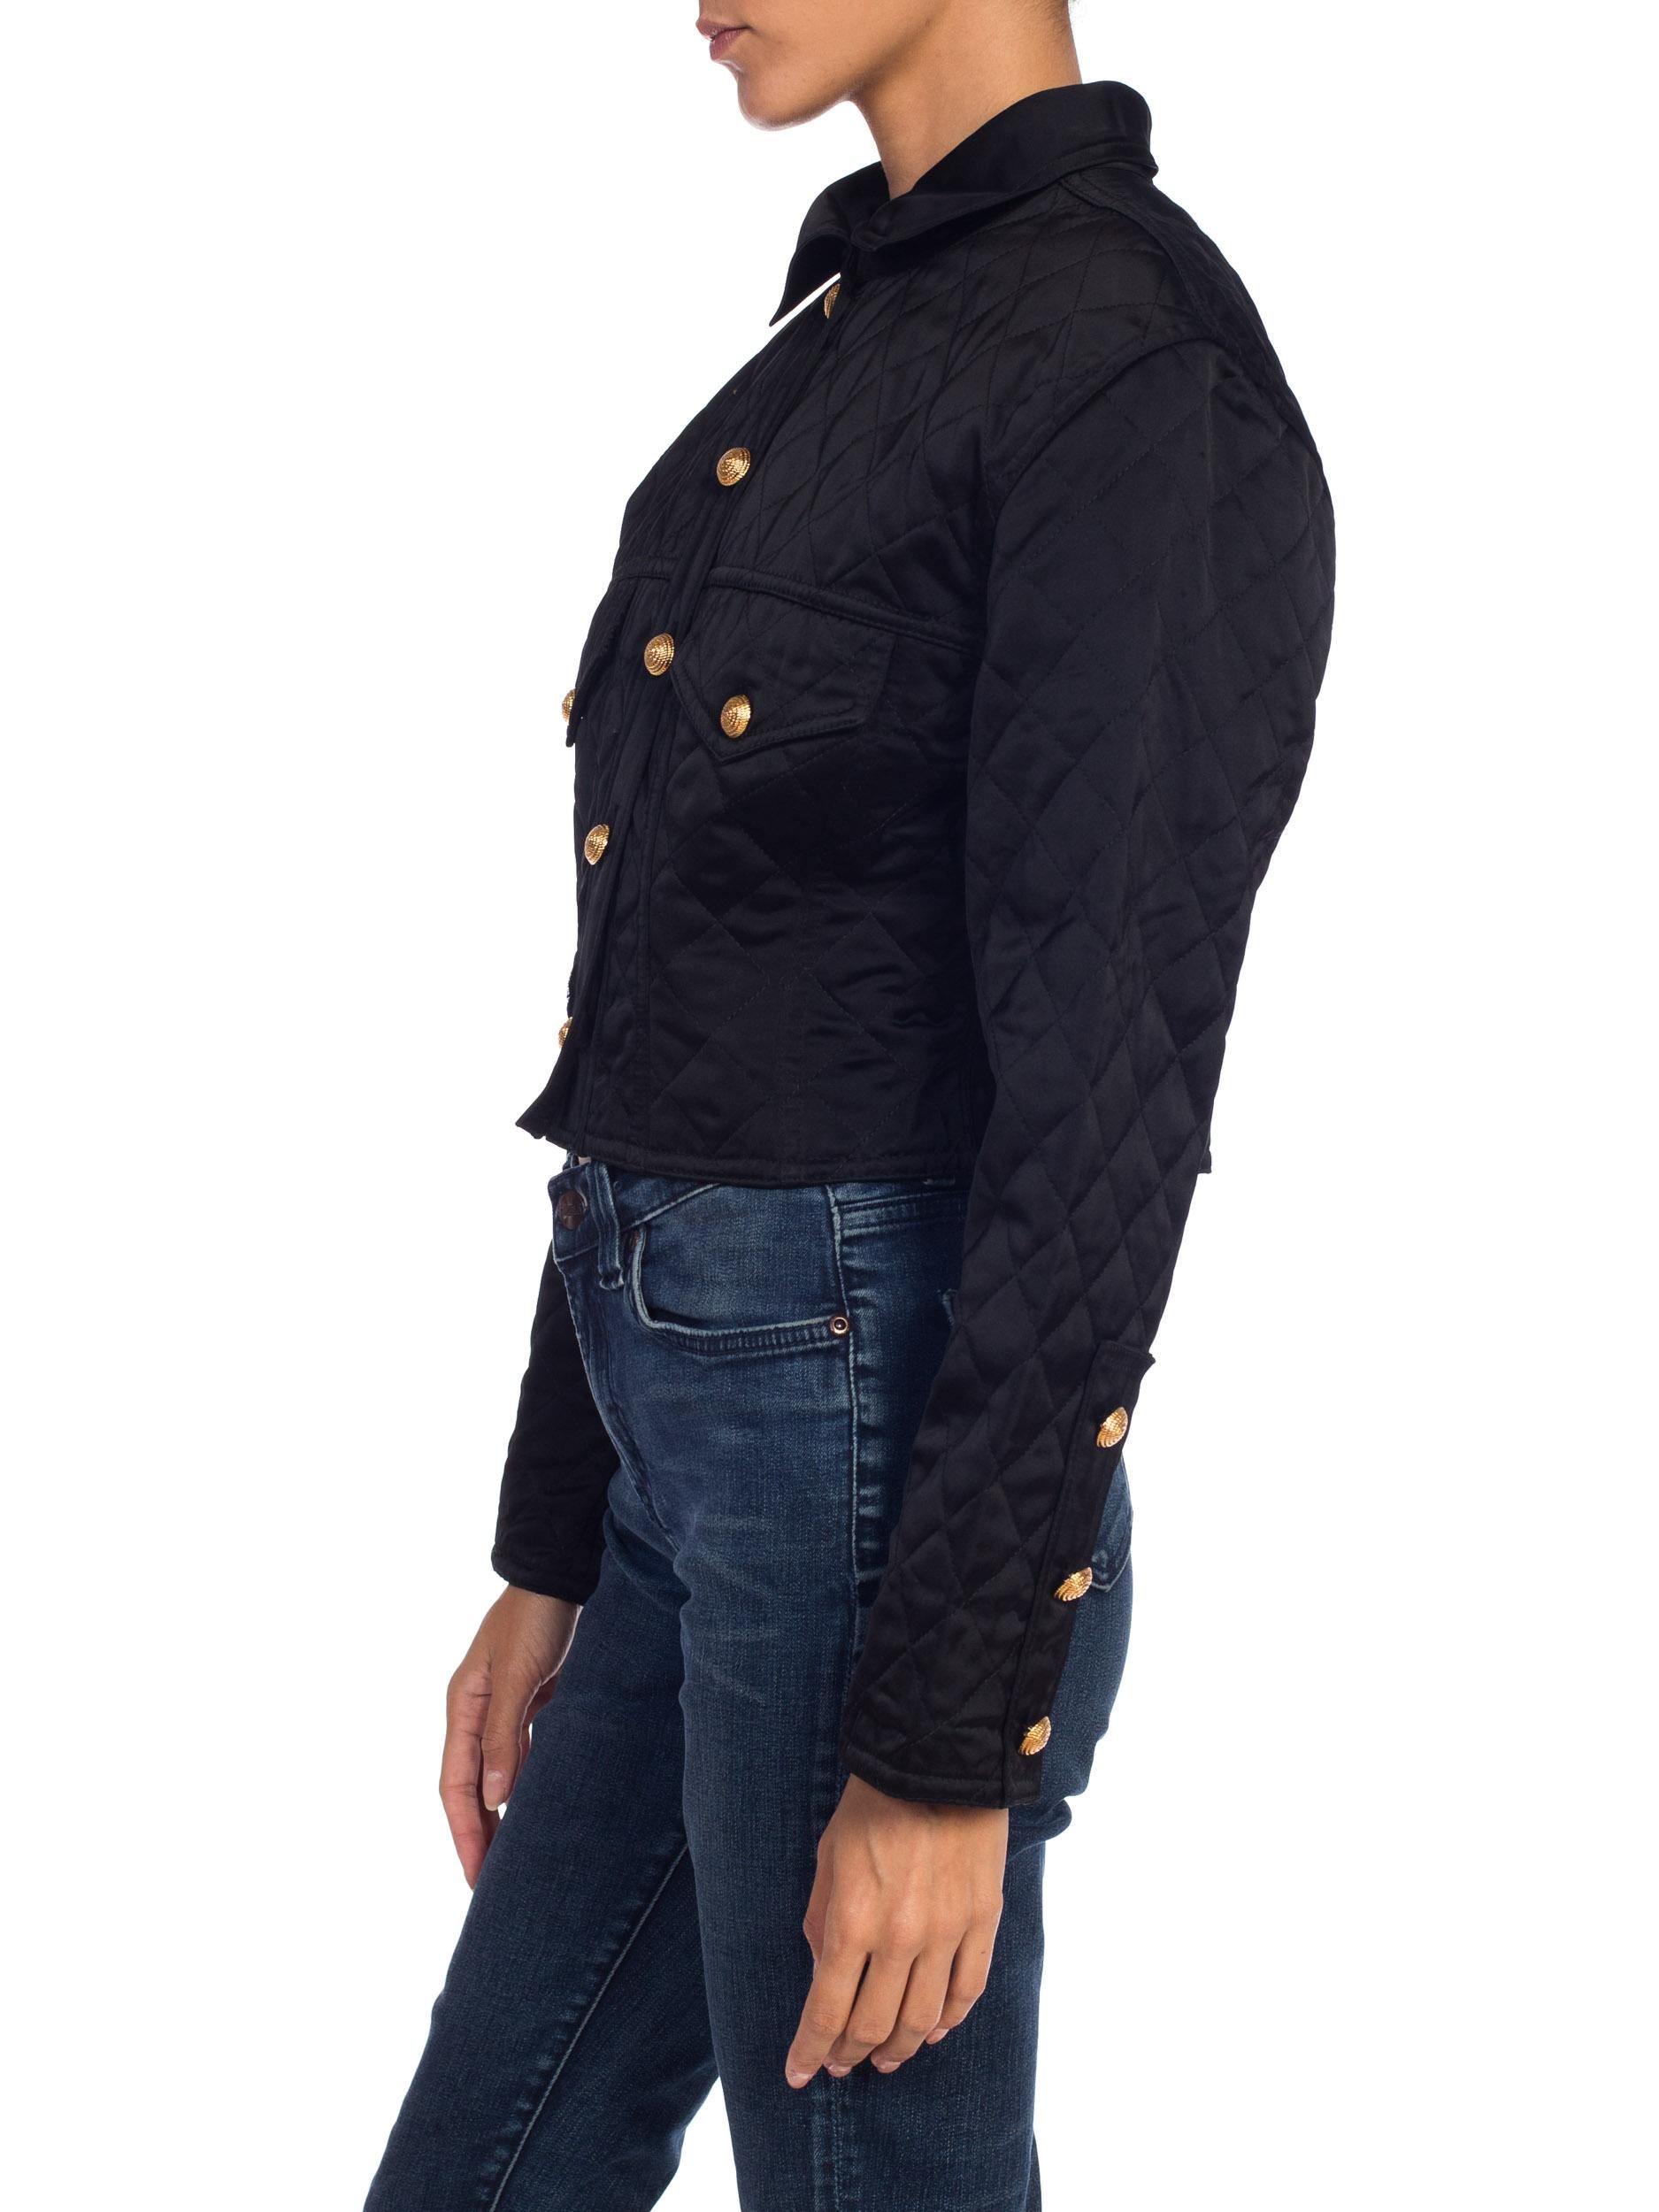 Women's 1990s Quilted Versace Style Cropped Satin Jean Jacket